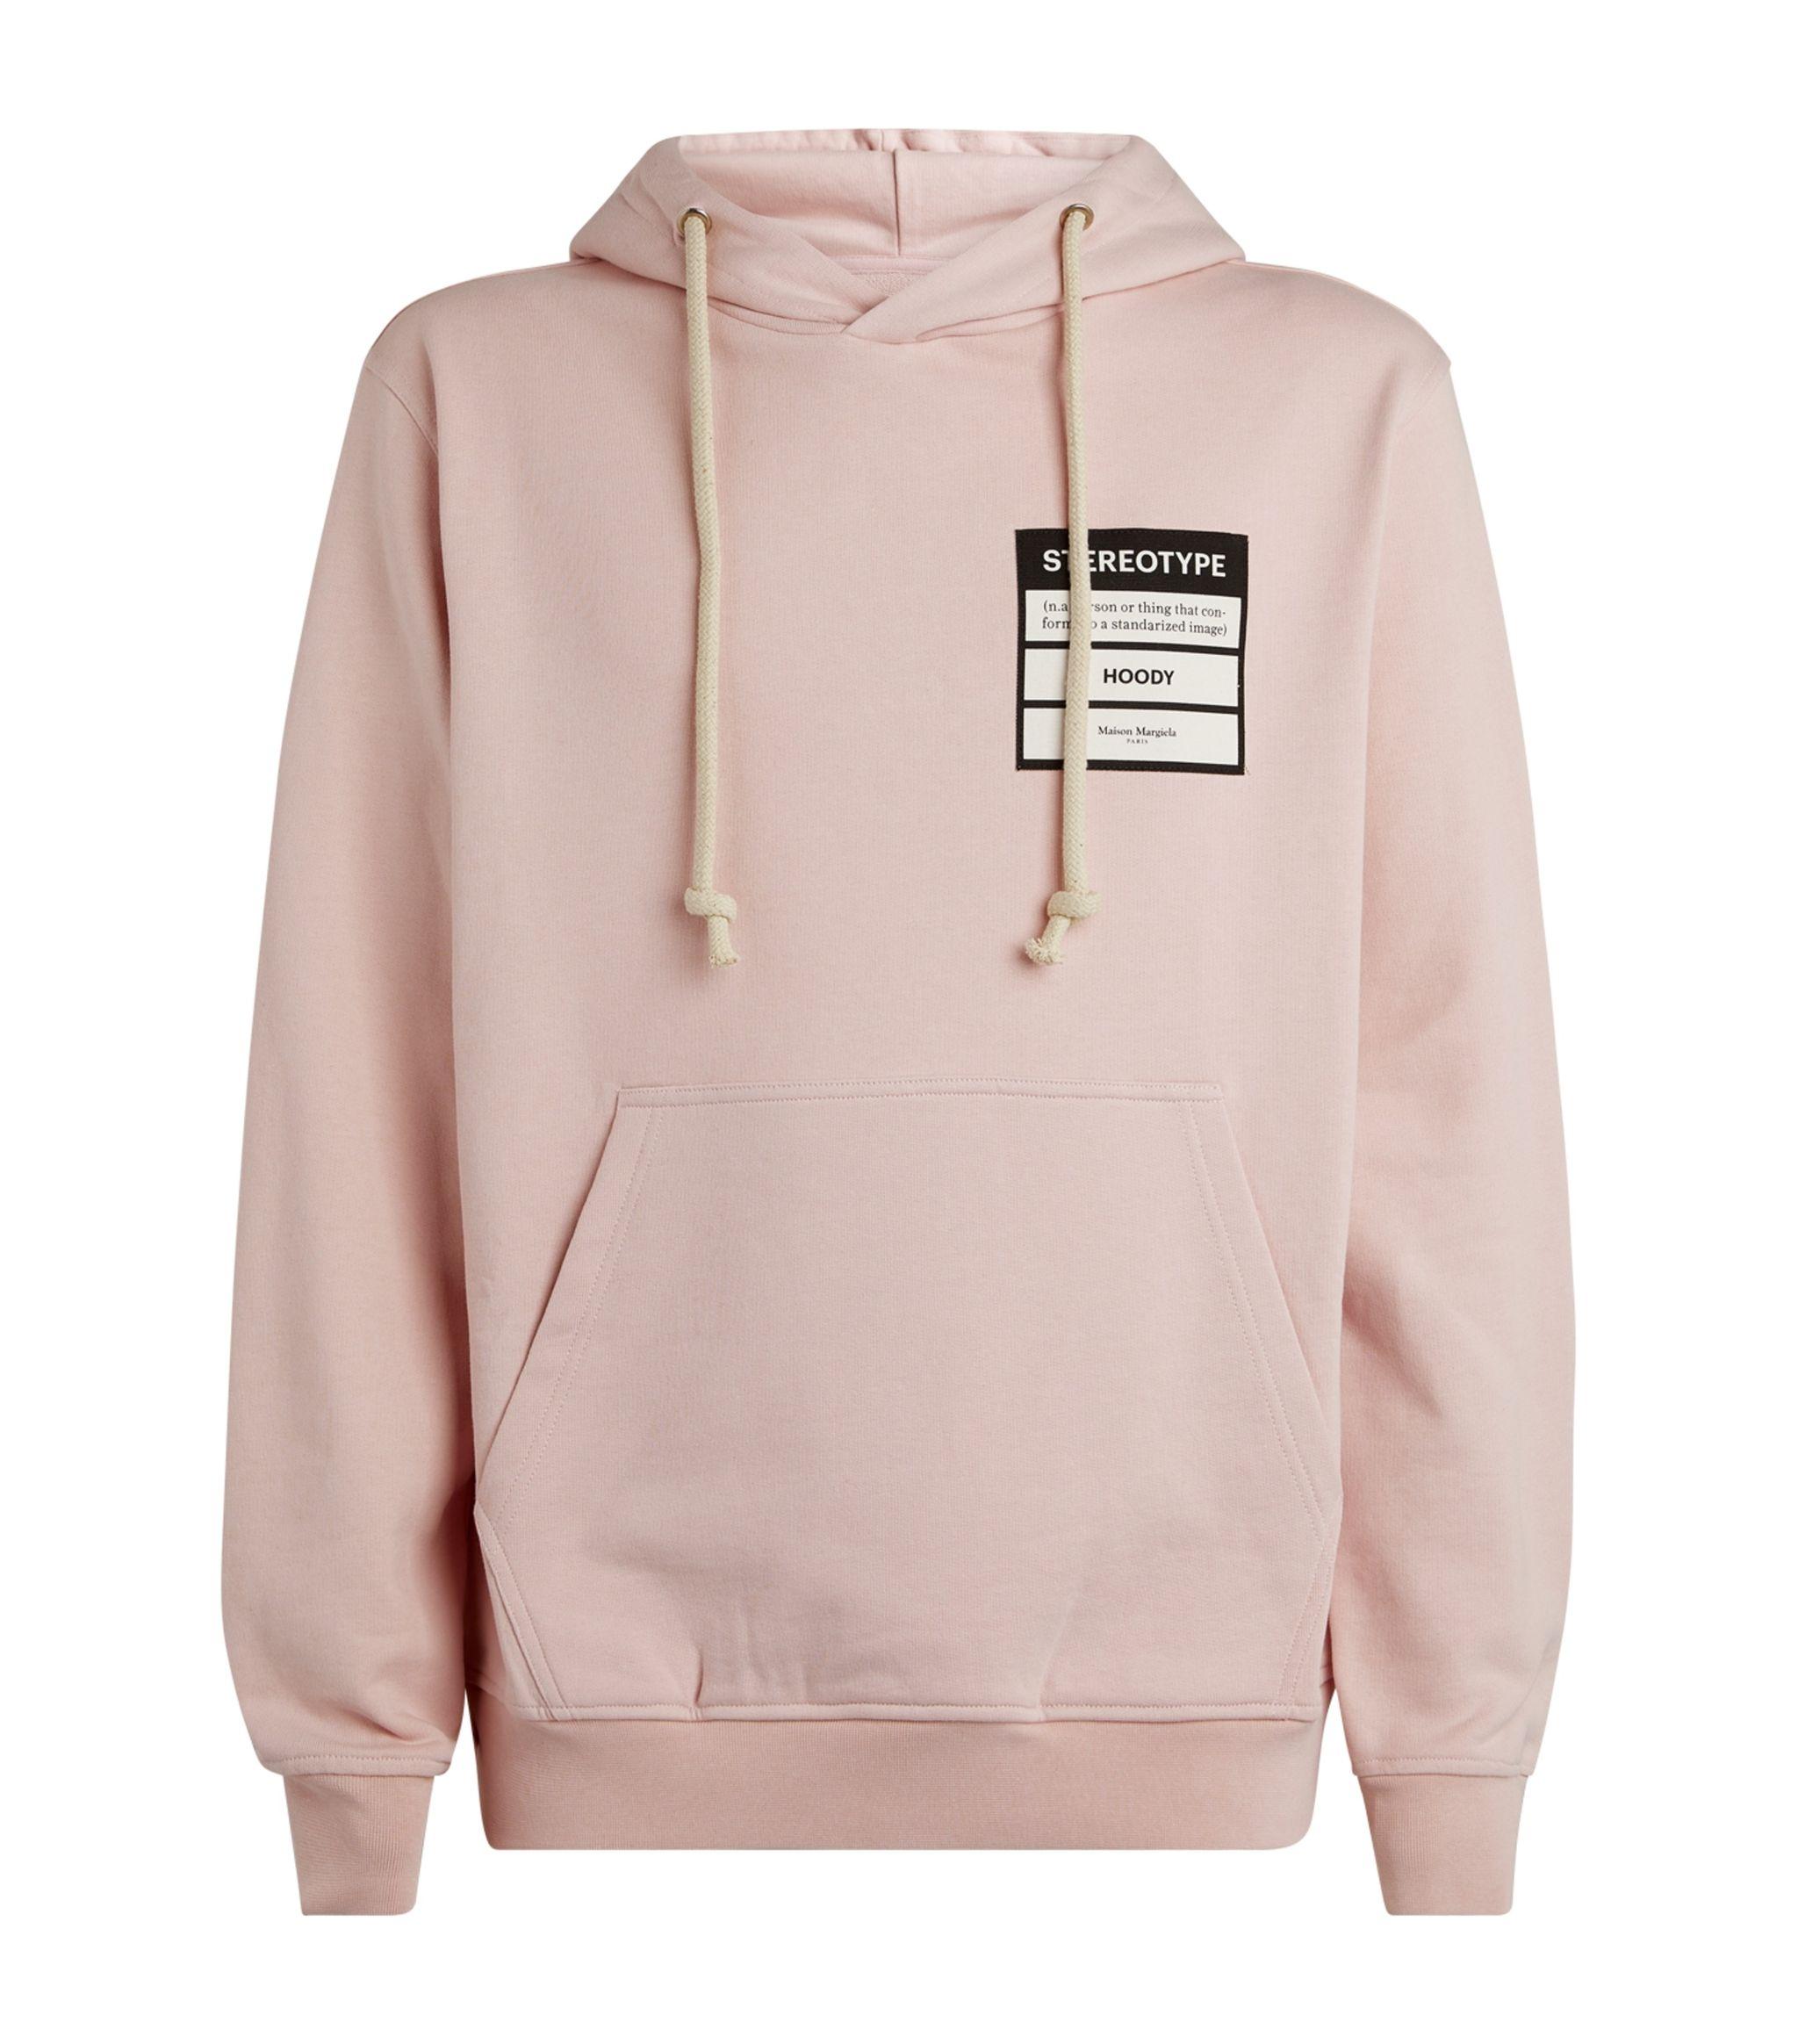 Maison Margiela Cotton Stereotype Hoodie in Pink for Men - Lyst